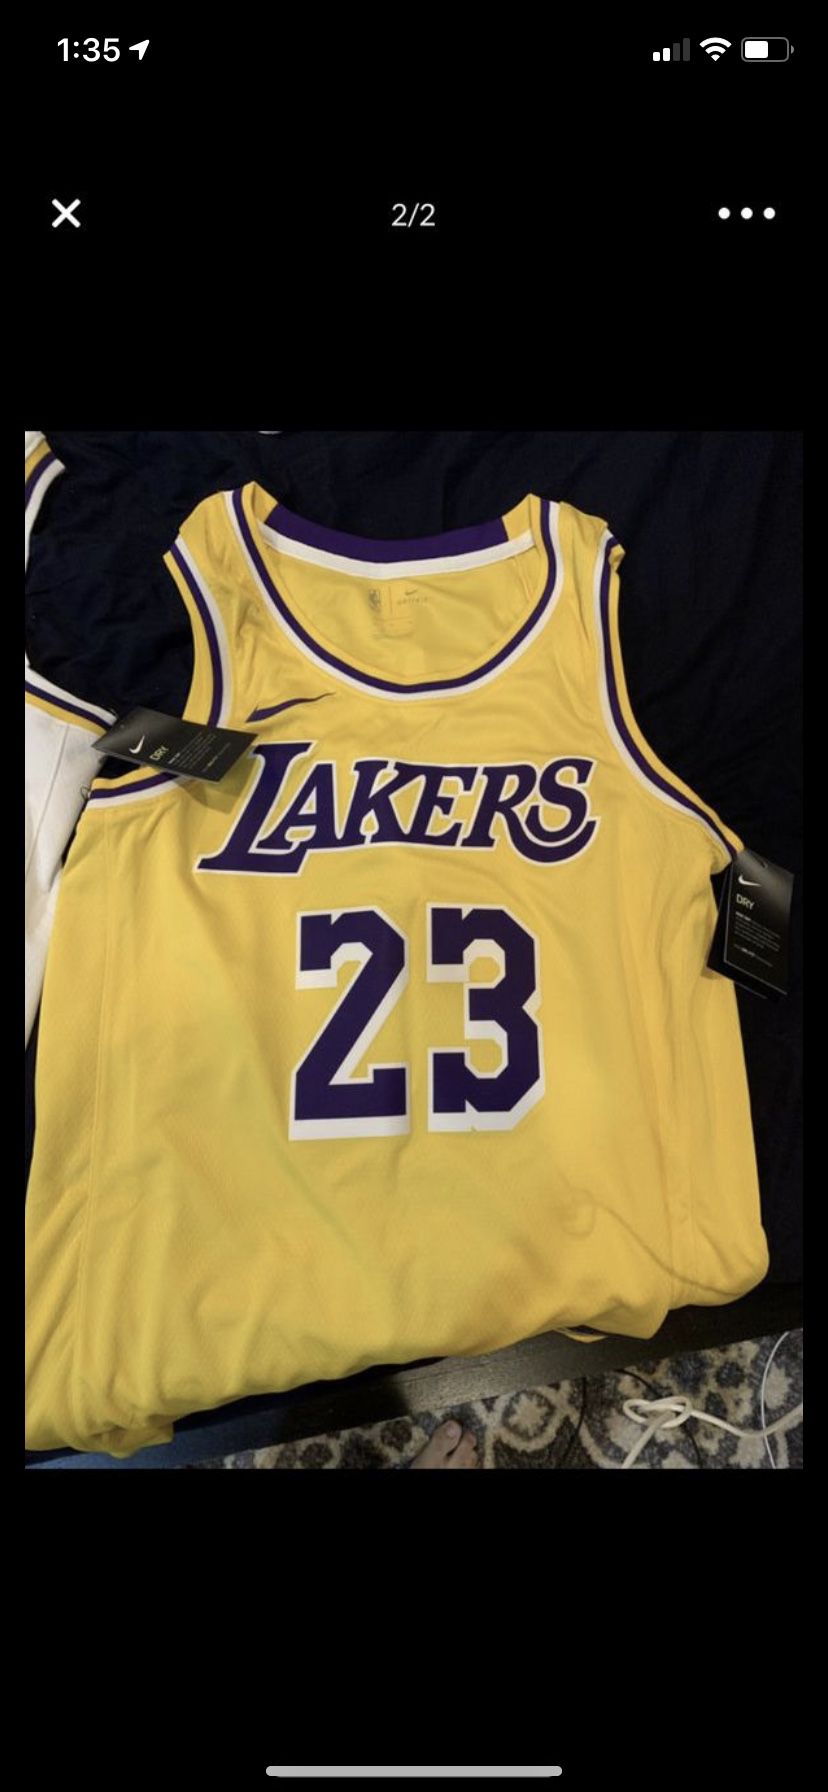 Authentic Lebron James Statement Jersey 22/23- W Bibigo Patch (Large) for  Sale in Los Angeles, CA - OfferUp